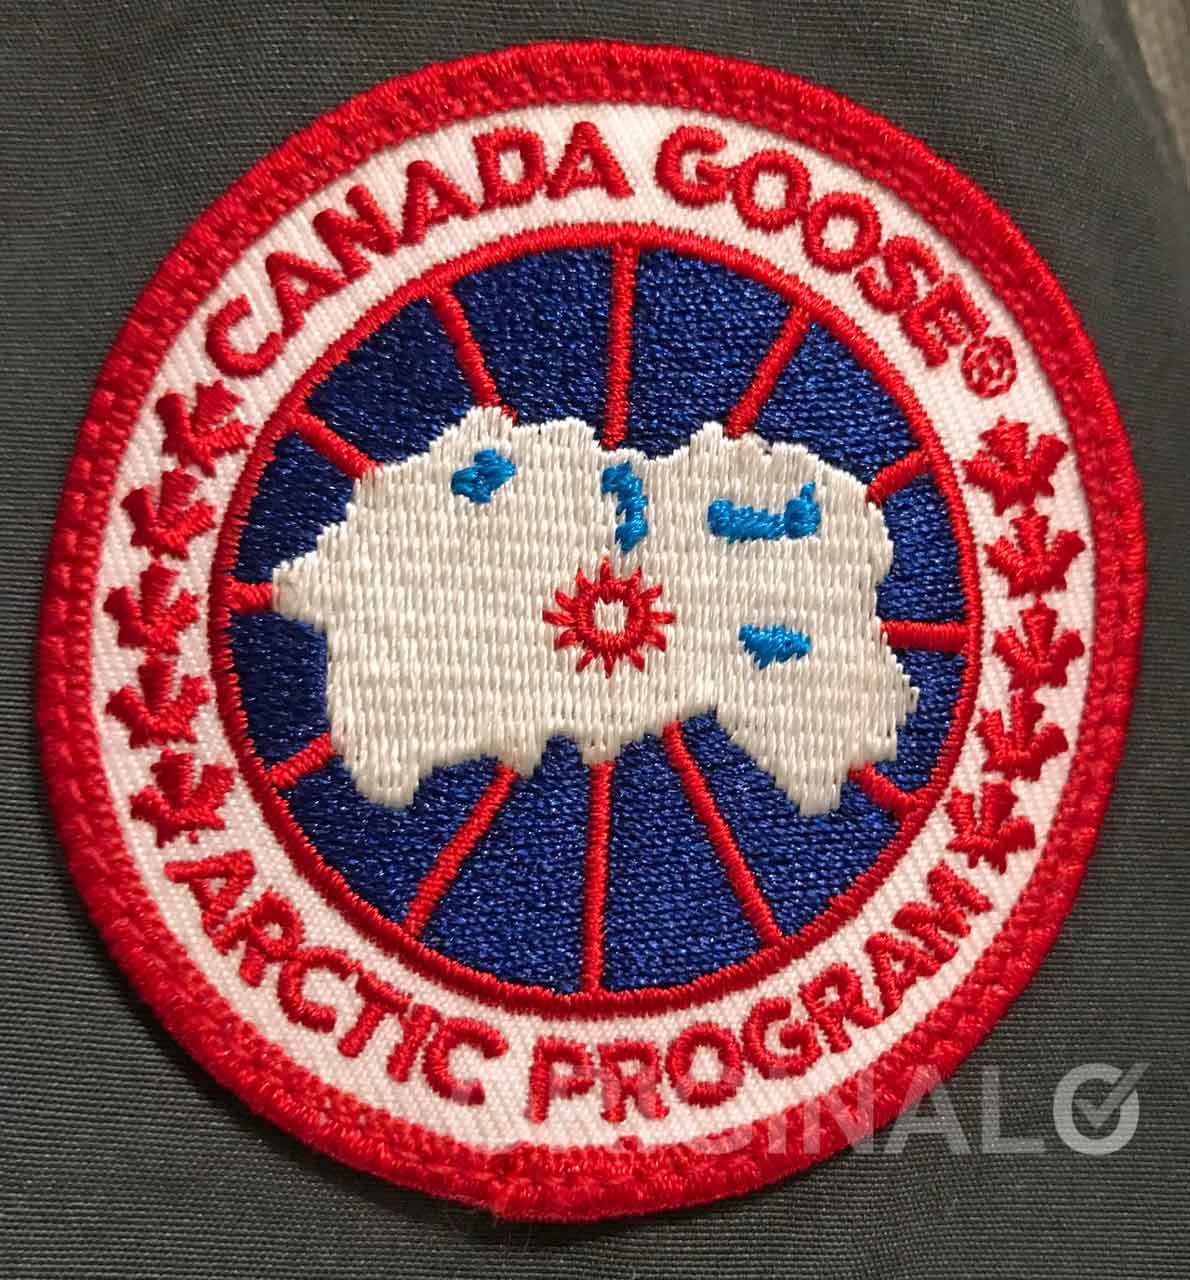 Canada Goose jacket - Best tips to spot a fake!